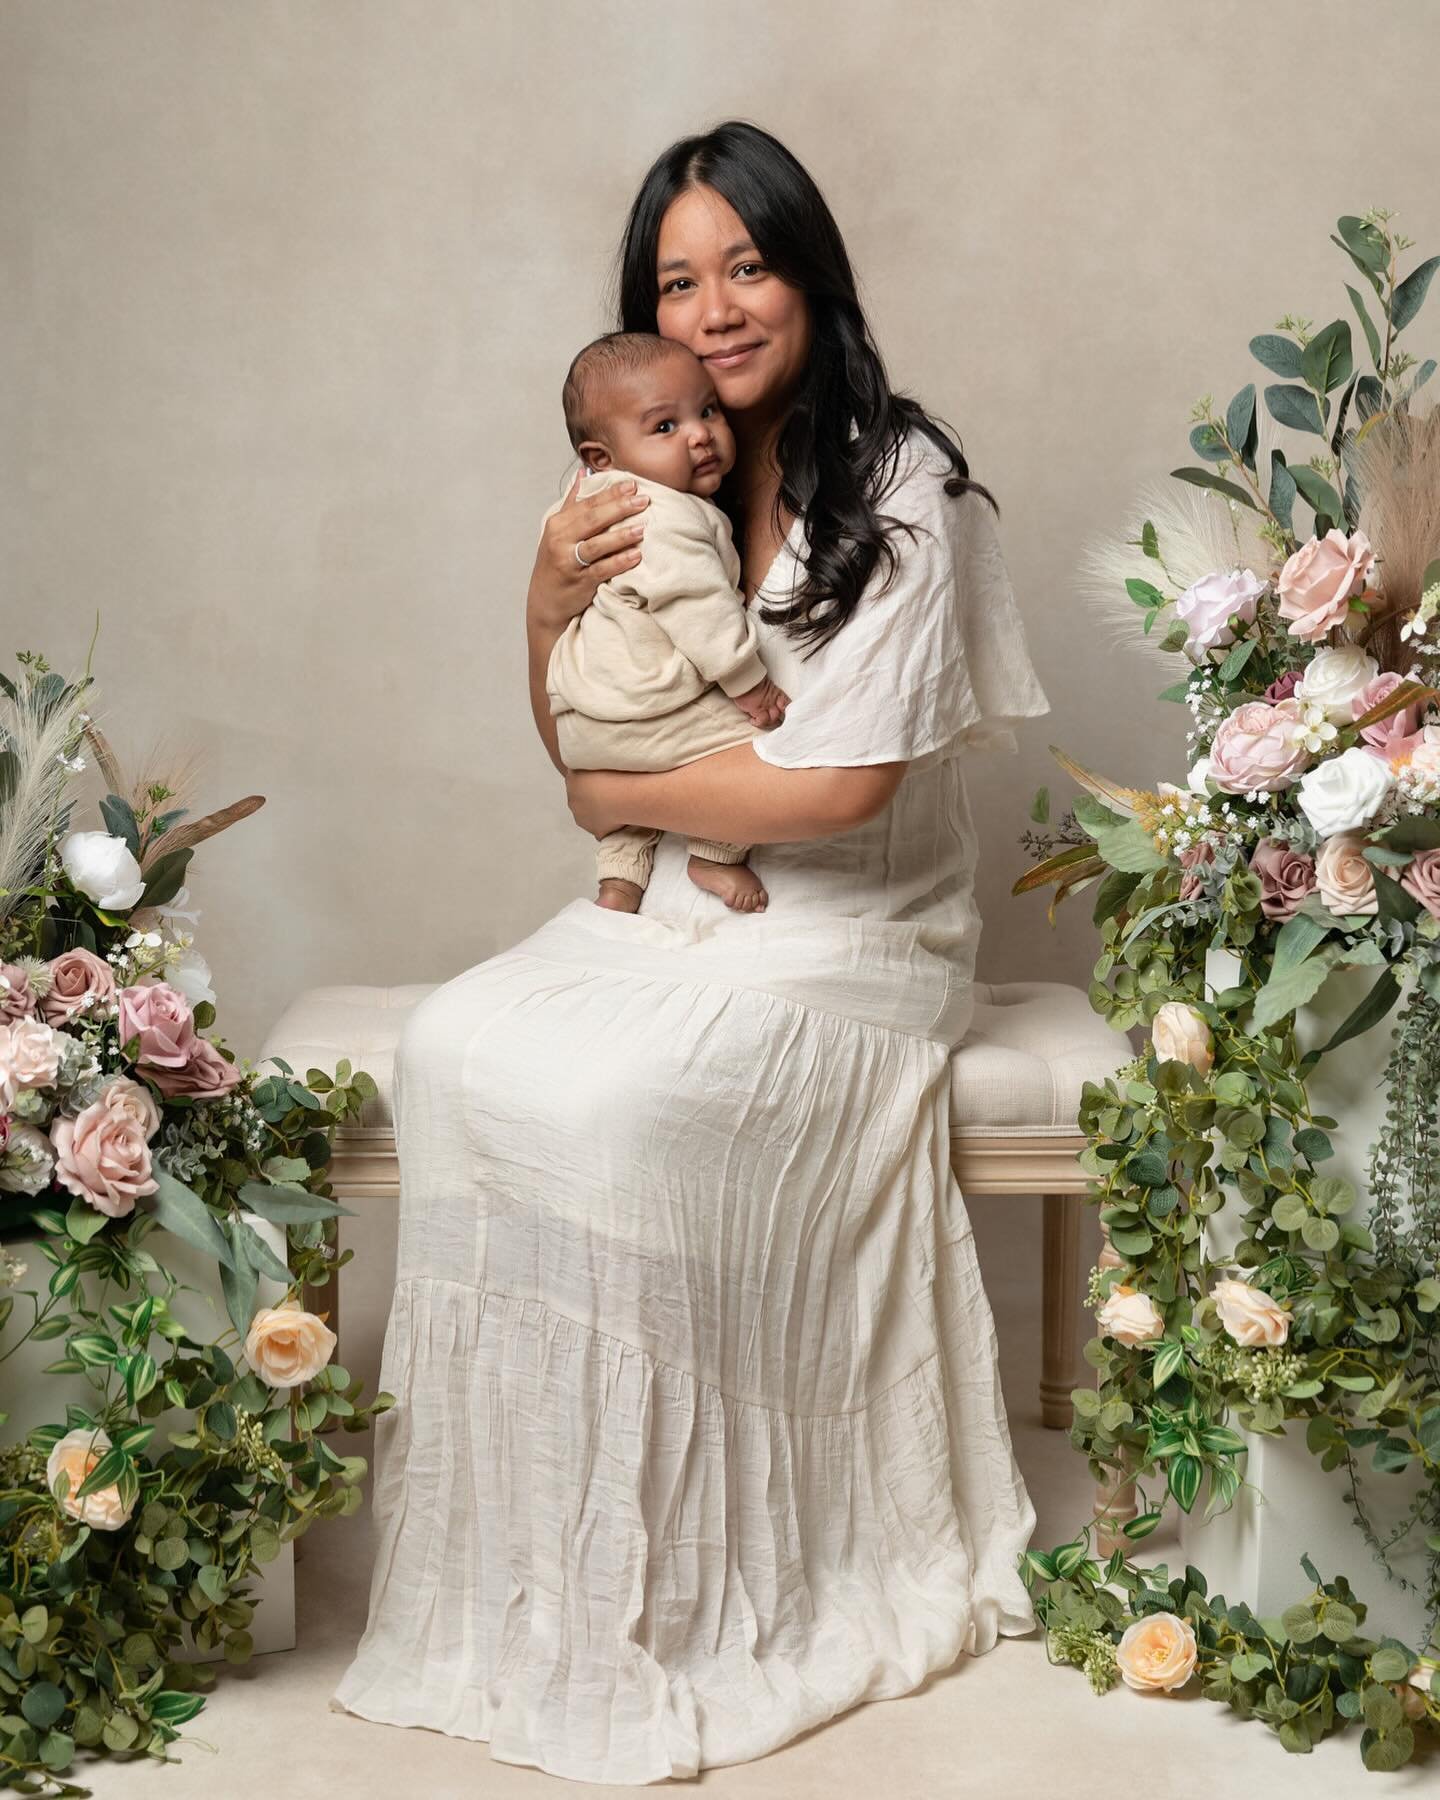 I hope all my amazing clients/friends had the most special Mother&rsquo;s Day and were spoiled all day long. How beautiful is Melanie with her sweet boy, Rome? 💐 Thank you for trusting me to document these memories for you and Rome to cherish foreve